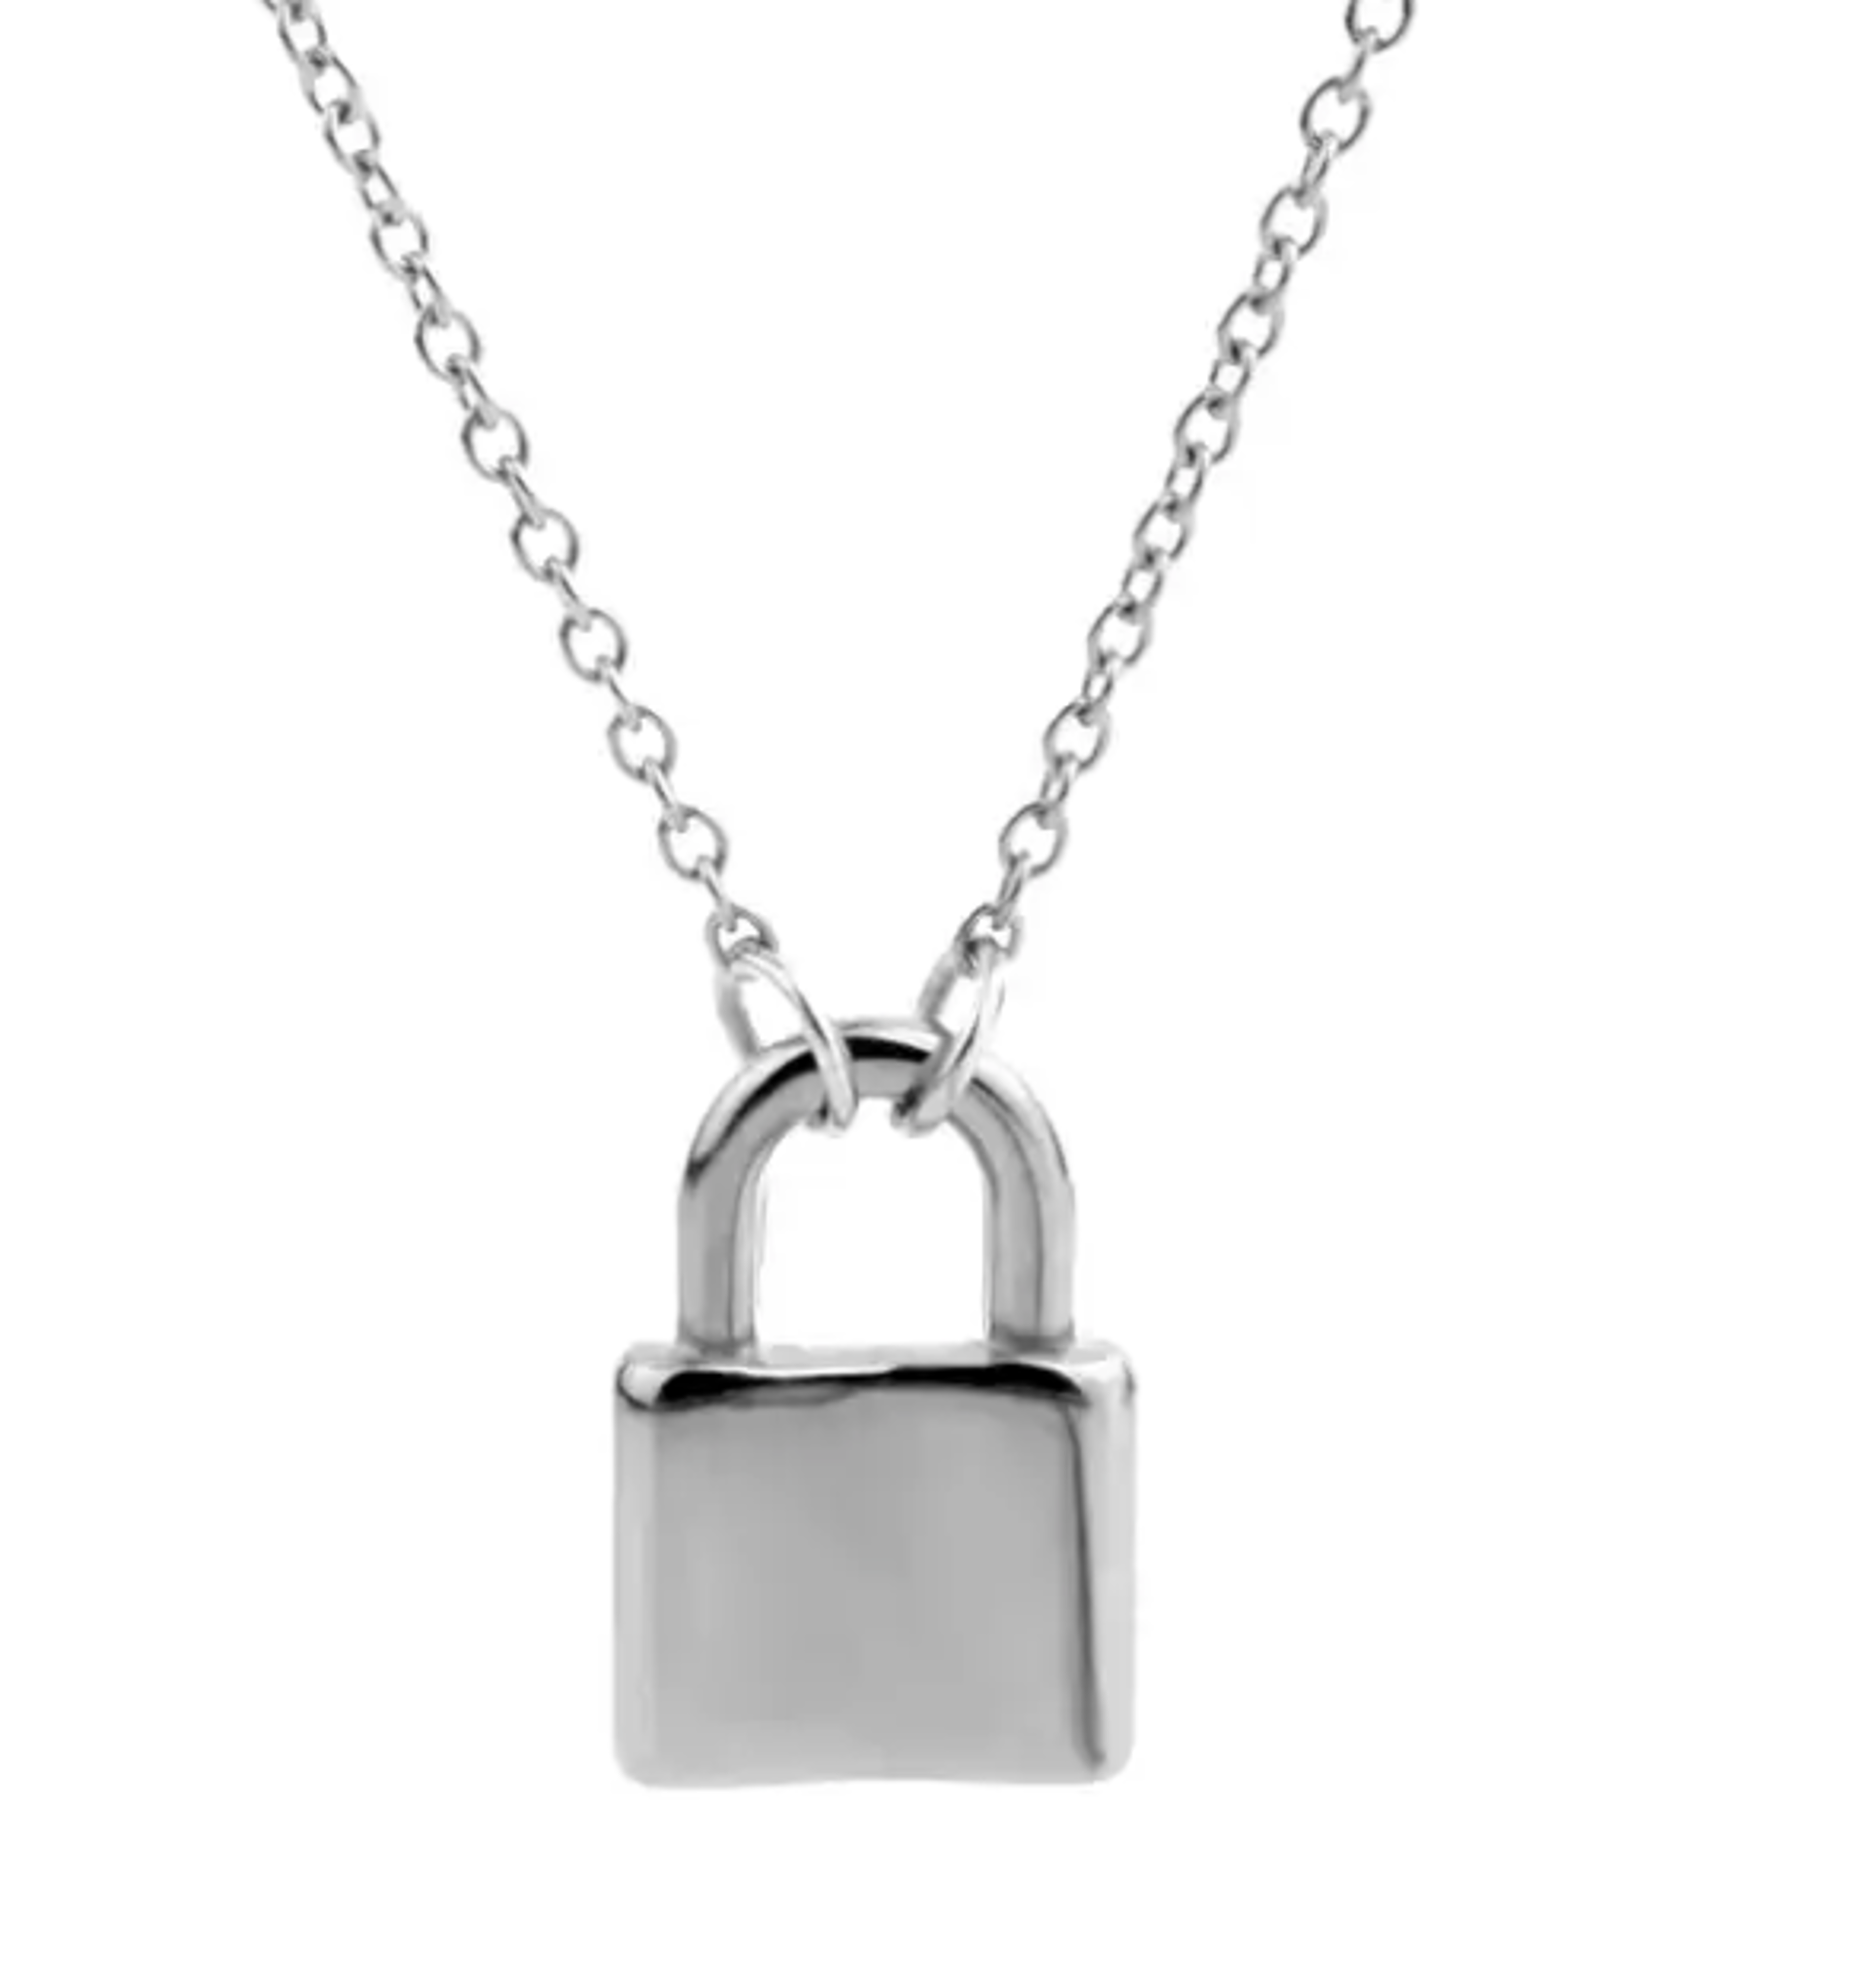 Alternate View 5 of NEW KimmieBBags Padlock Charm Necklace 061923